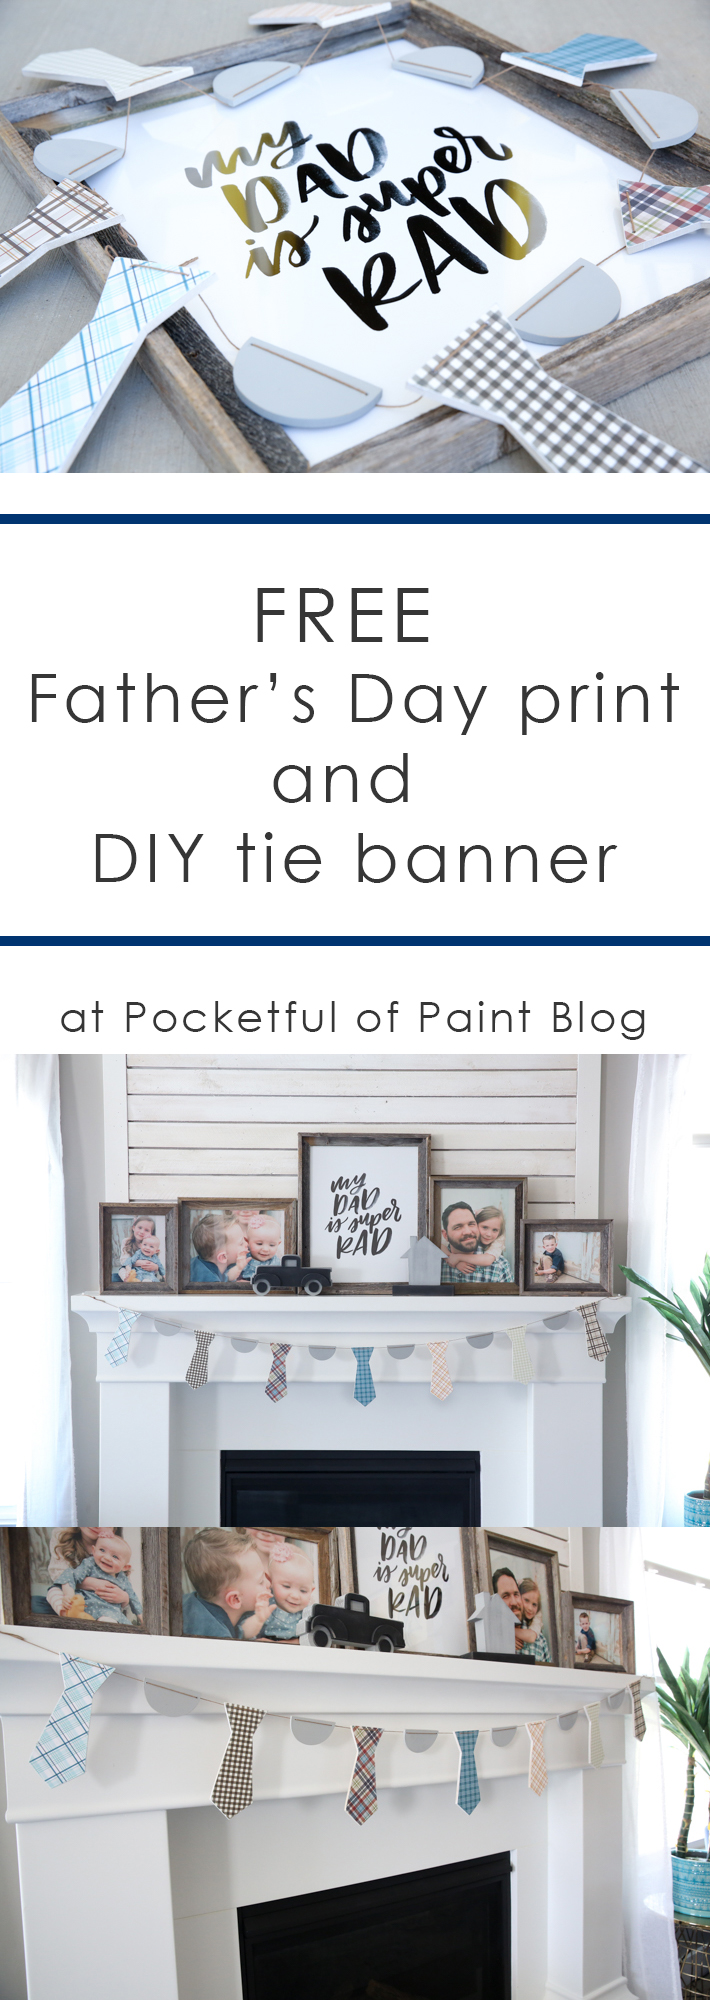 Father's Day Printable @pocketfulofpaint